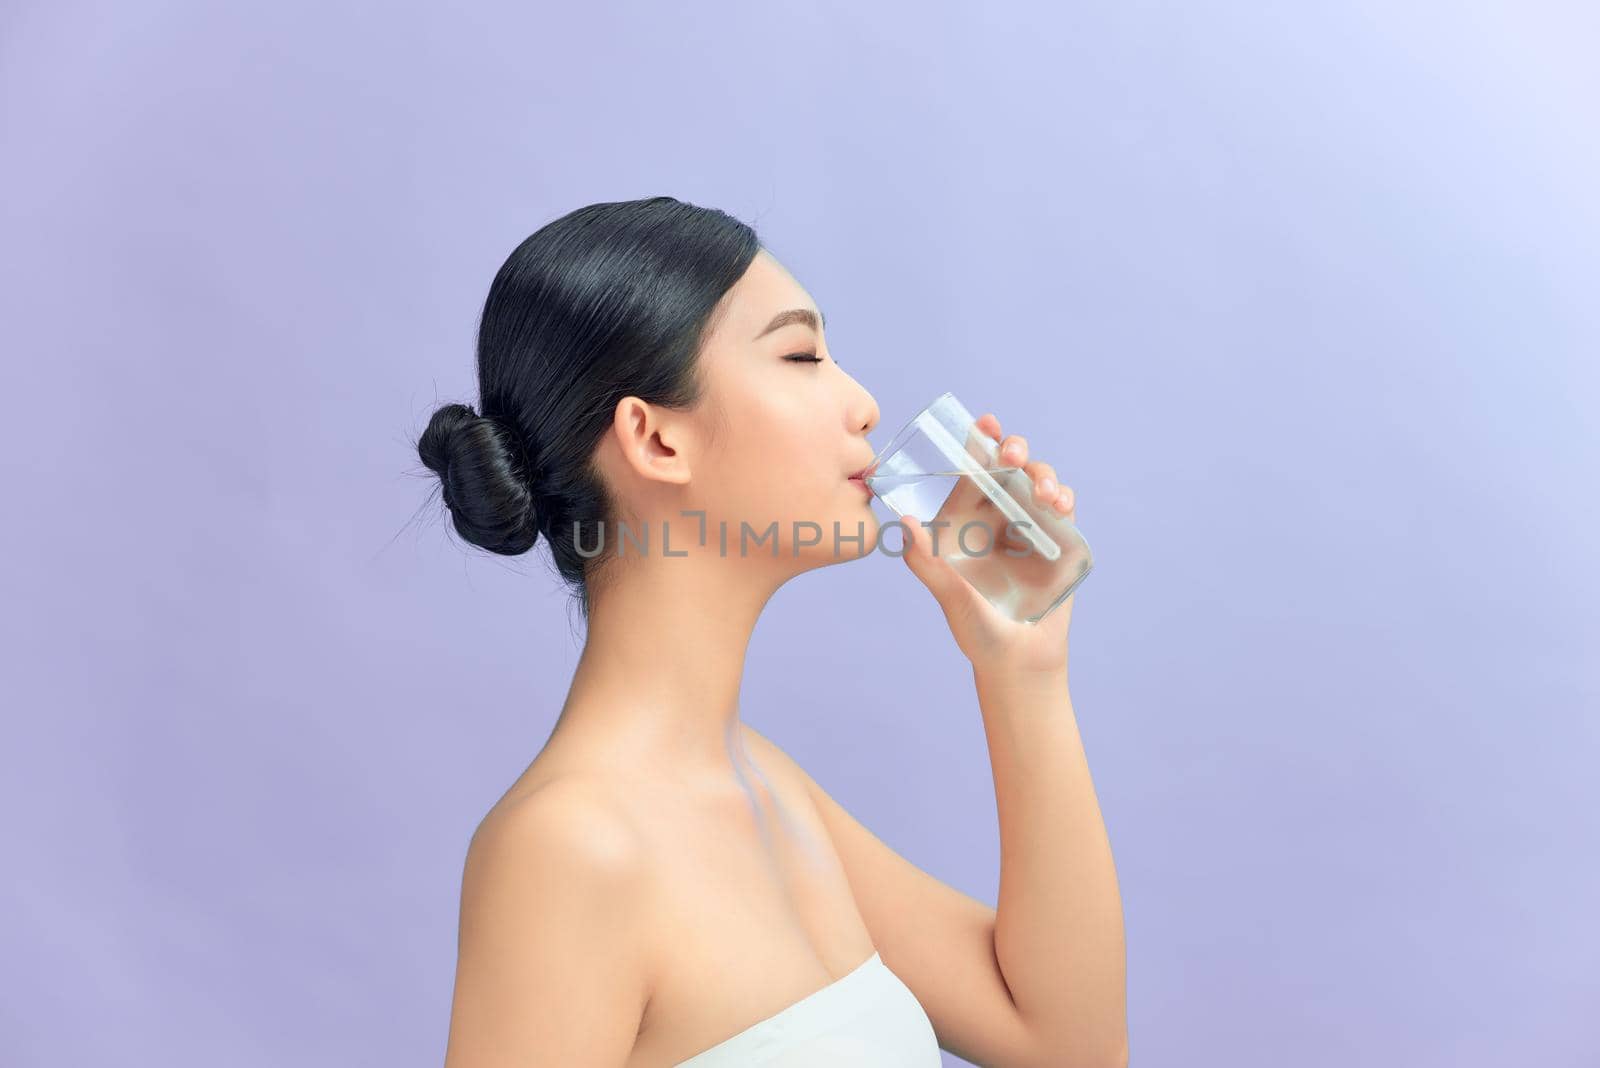 Attractive woman drinking water against purple background by makidotvn